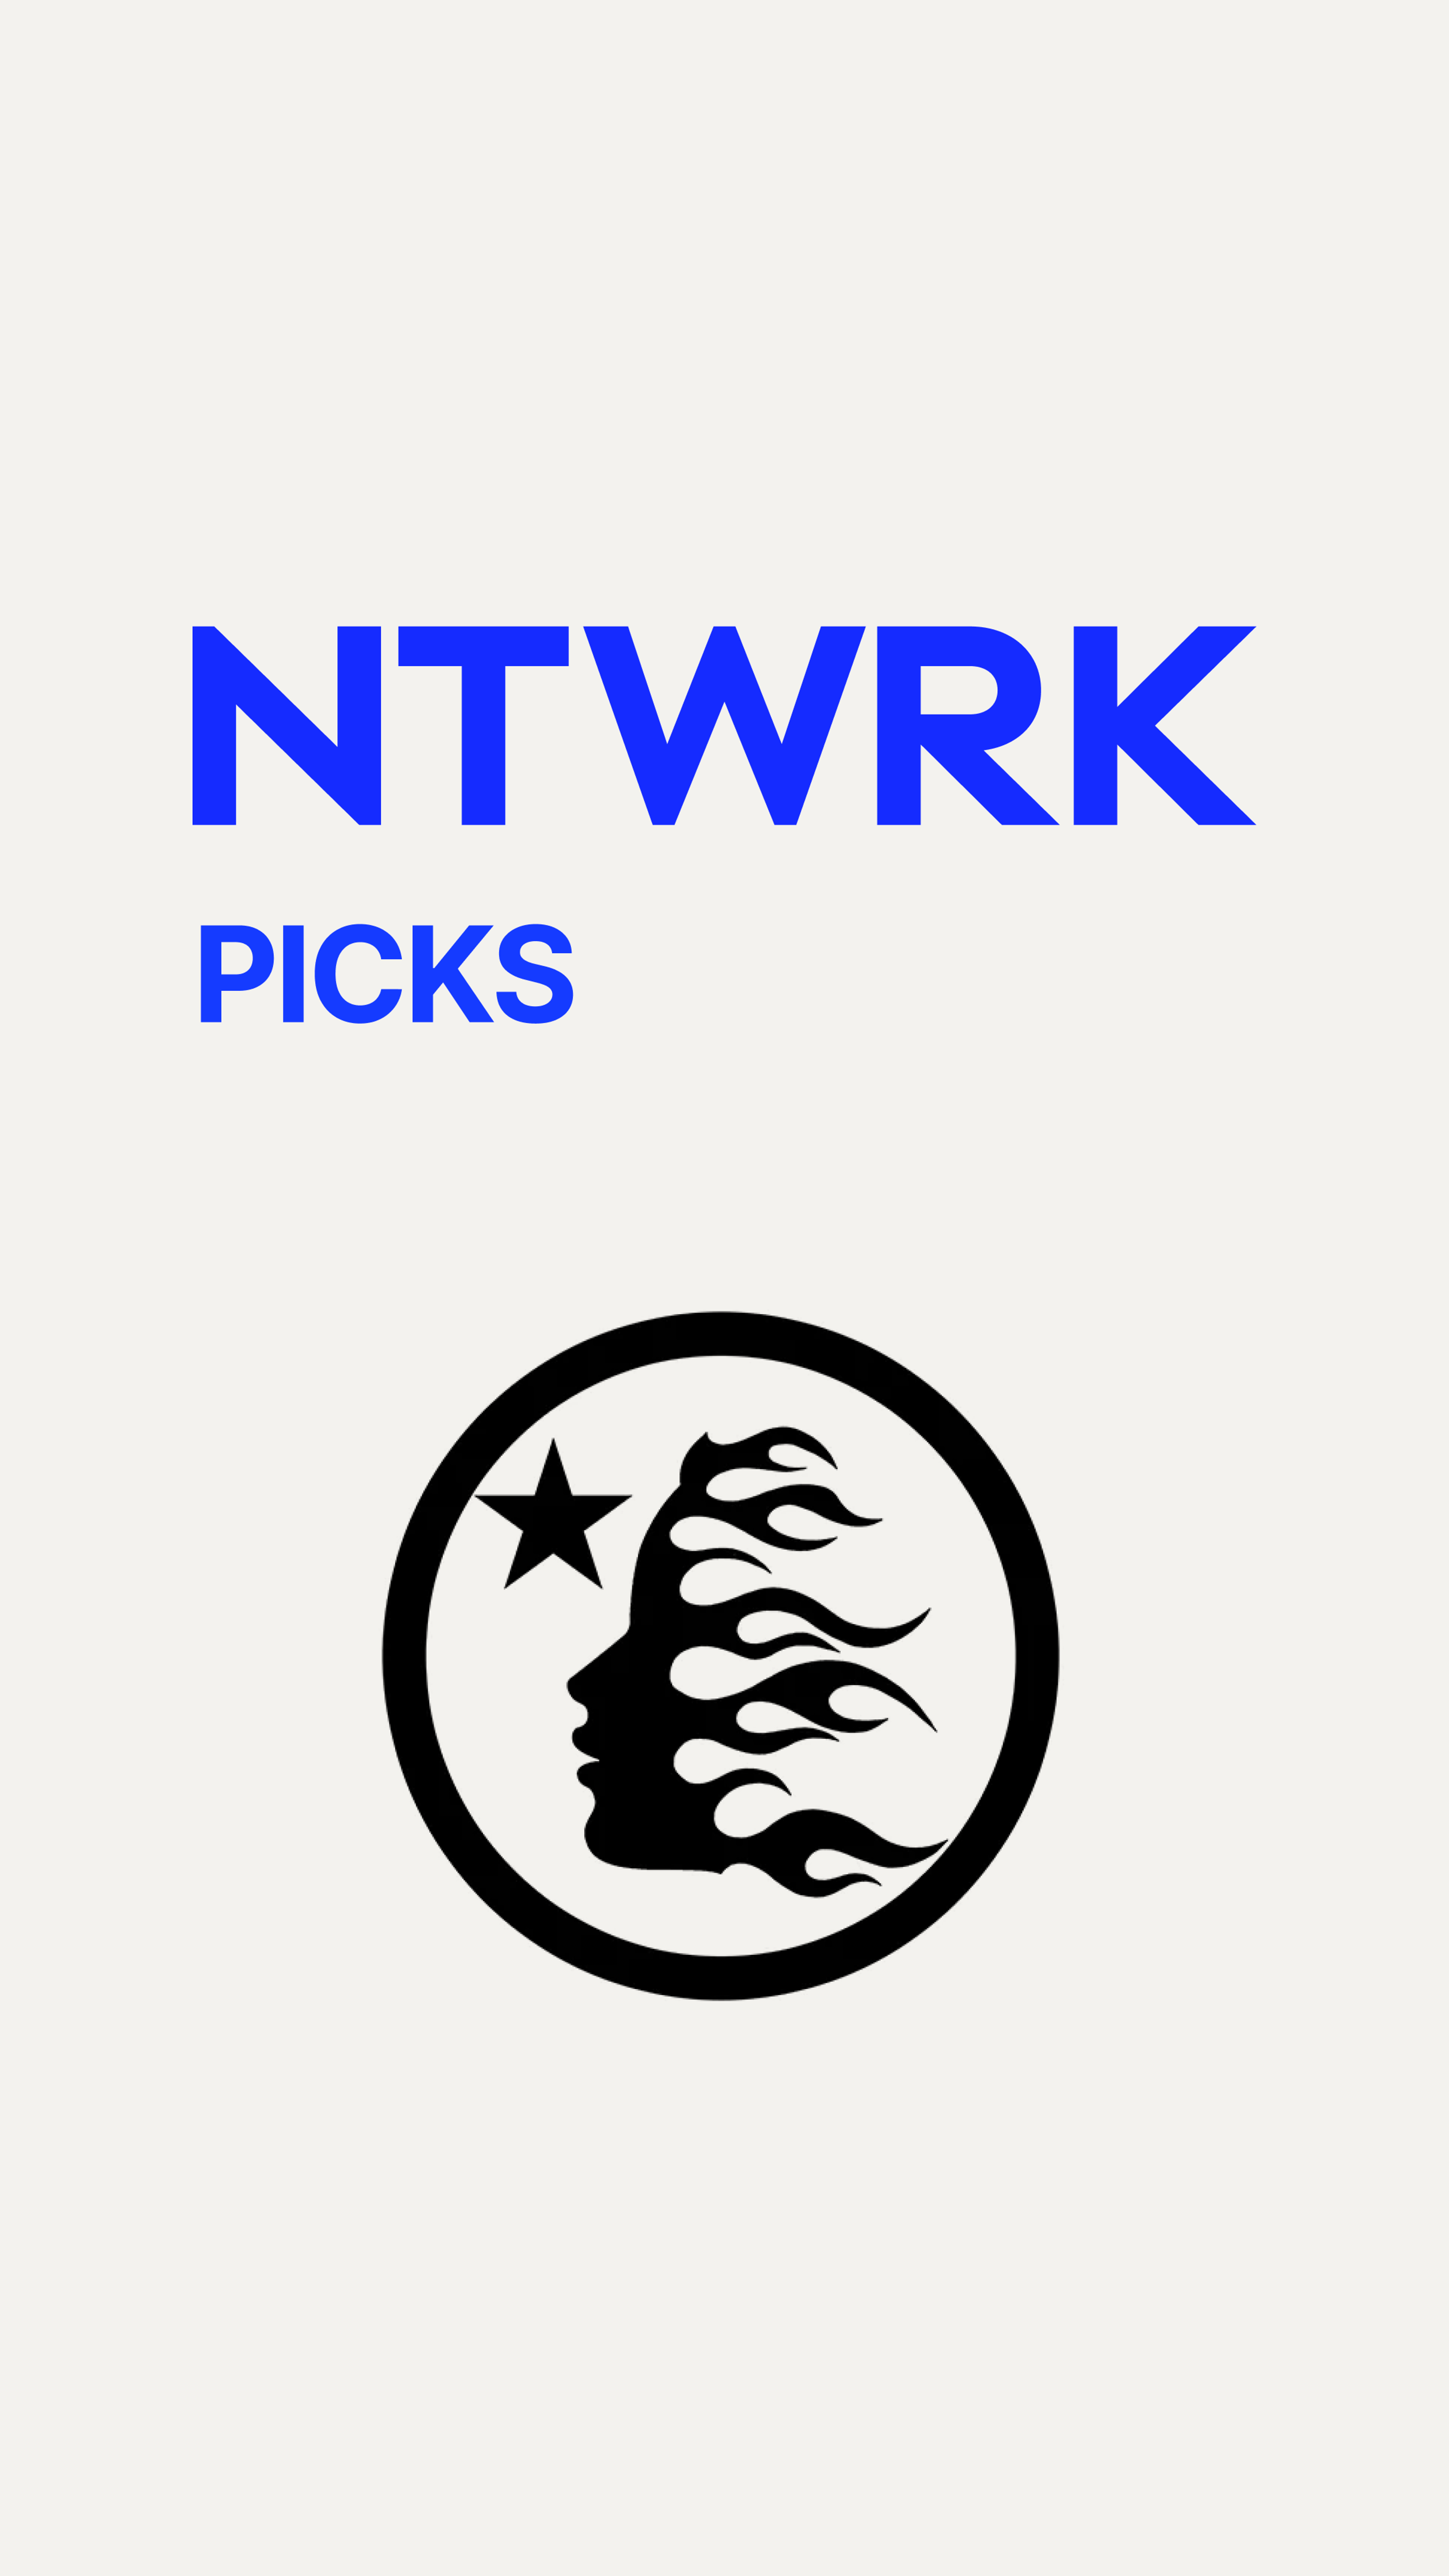 Preview image for the show titled "NTWRK Picks" at Today @ 10:00 PM